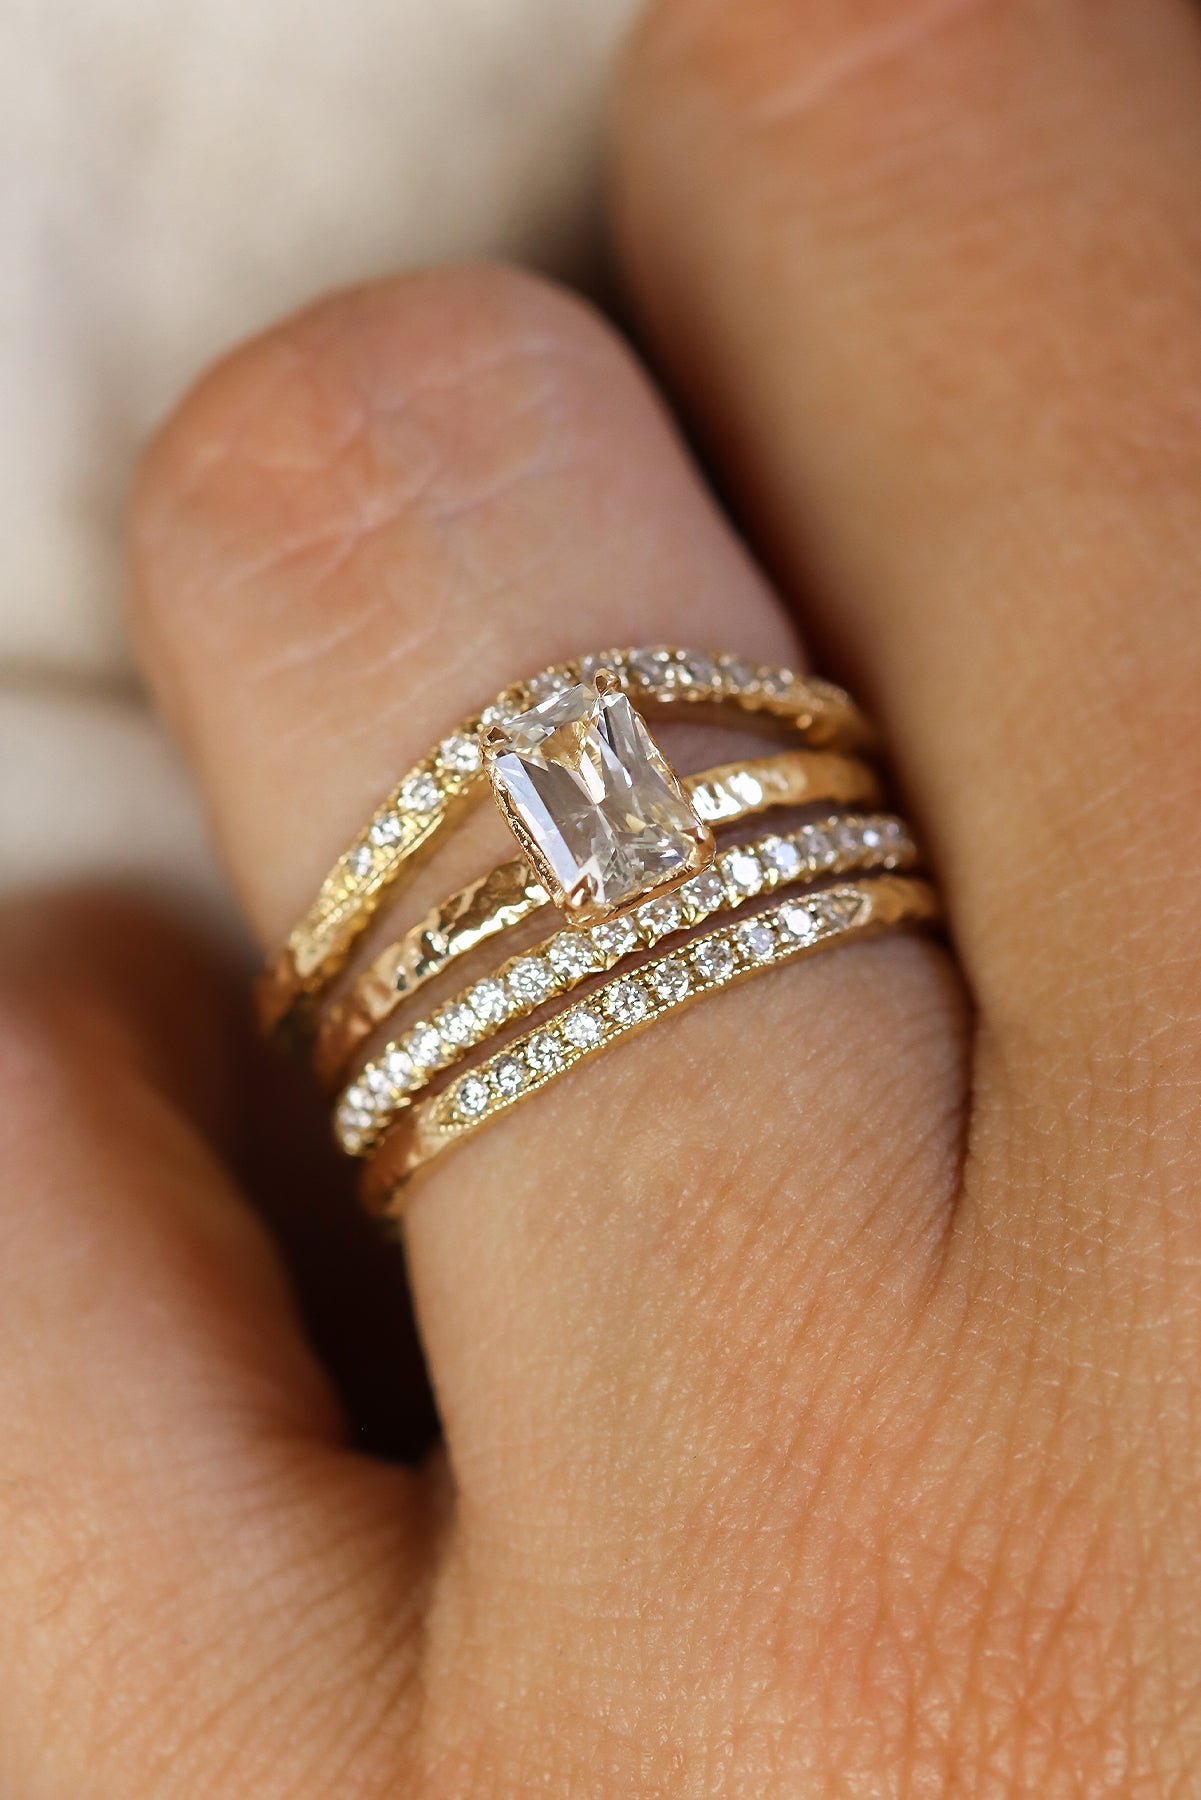 5-engagement-rings-under-1000-solitiare-solitaire-wedding-ring-stack